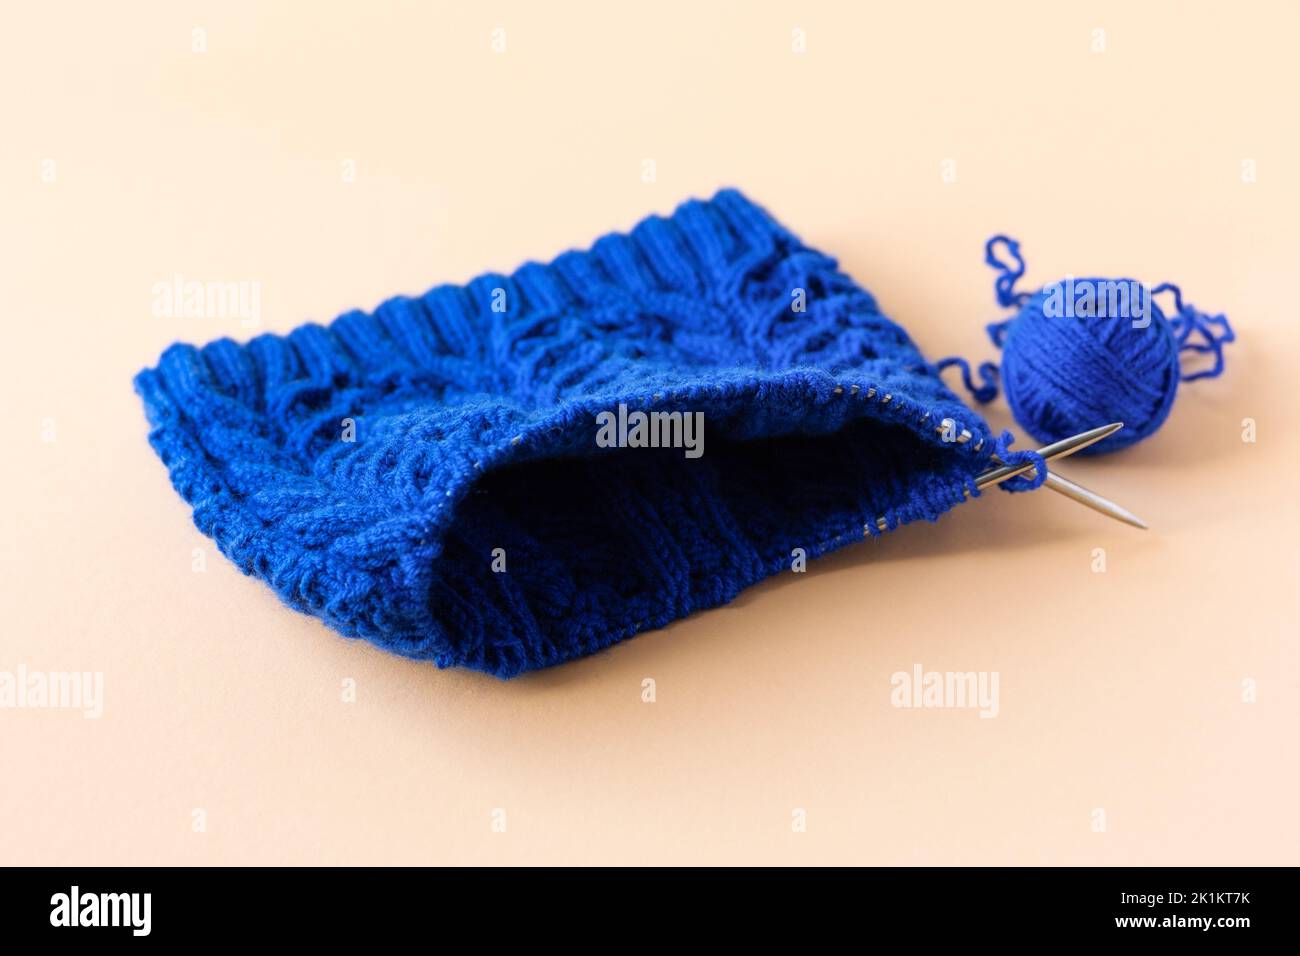 Knitting blue warm clothes with knitting needles and blue balls of thread on an orange background Stock Photo